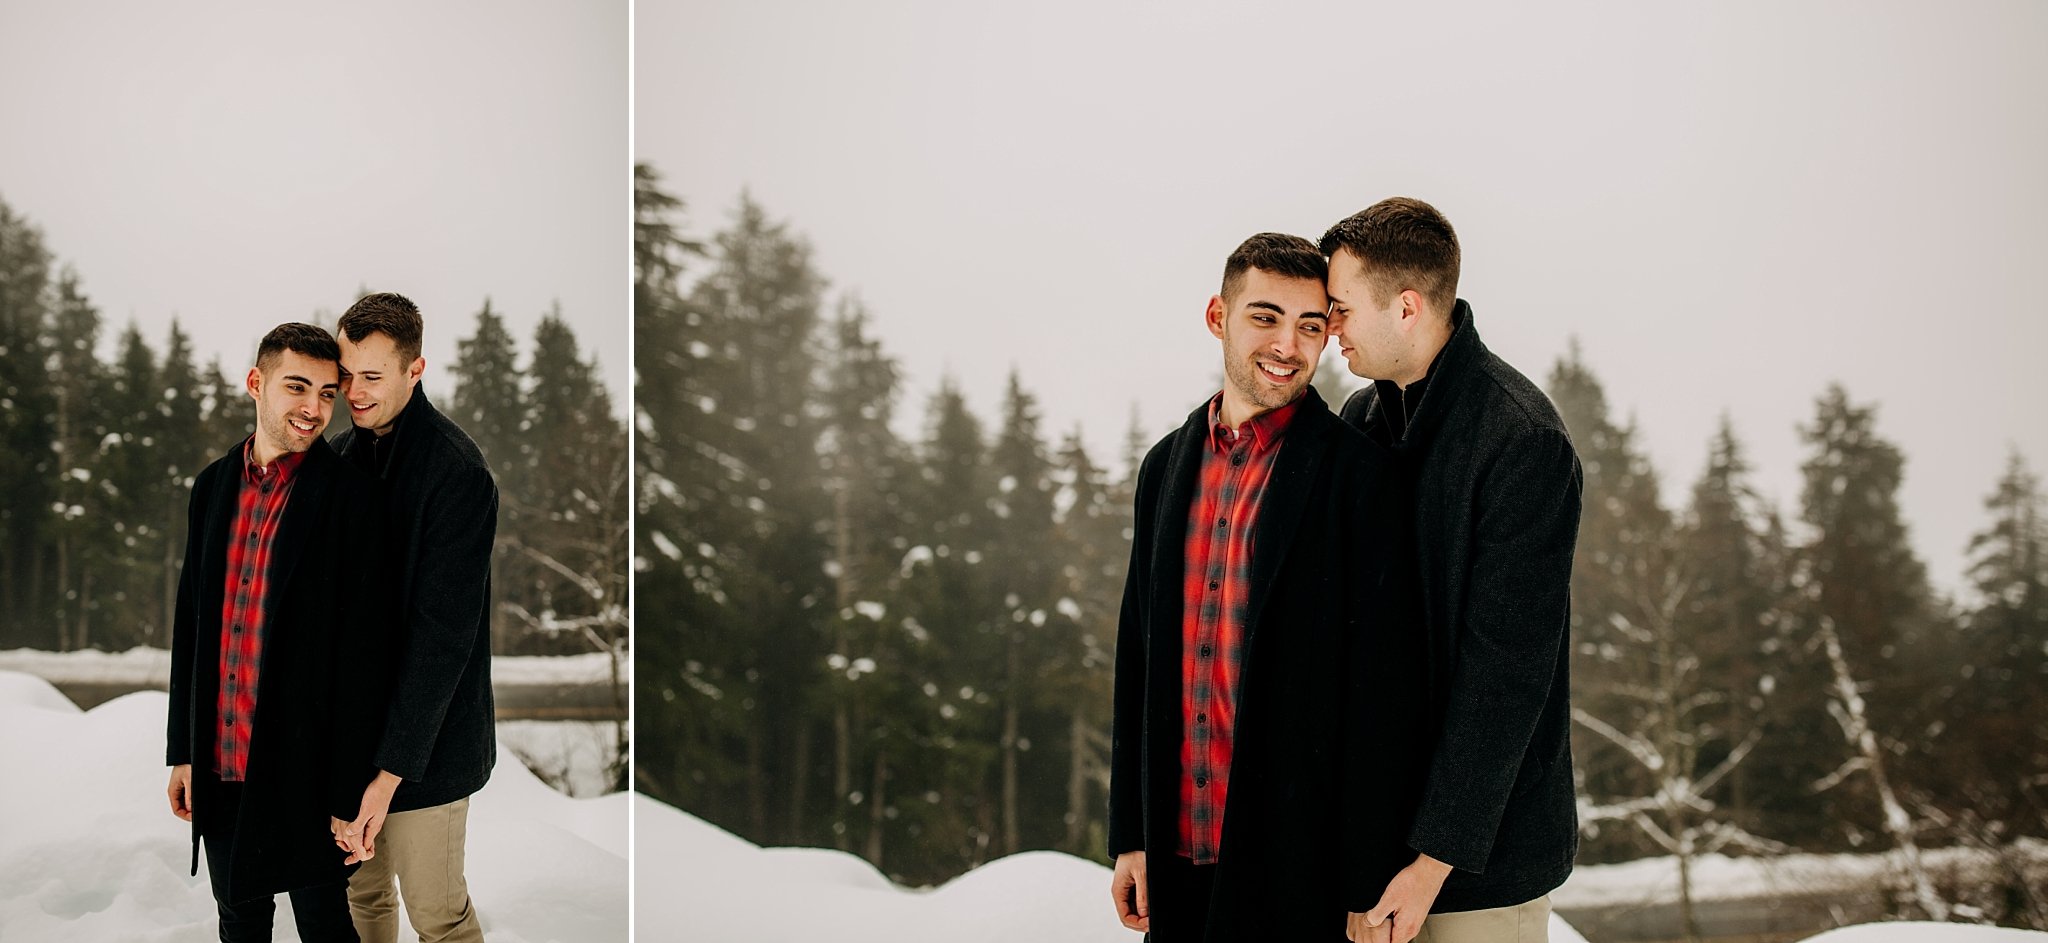 mount-seymour-north-vancouver-engagement-session-aileen-choi-photo_0031.jpg